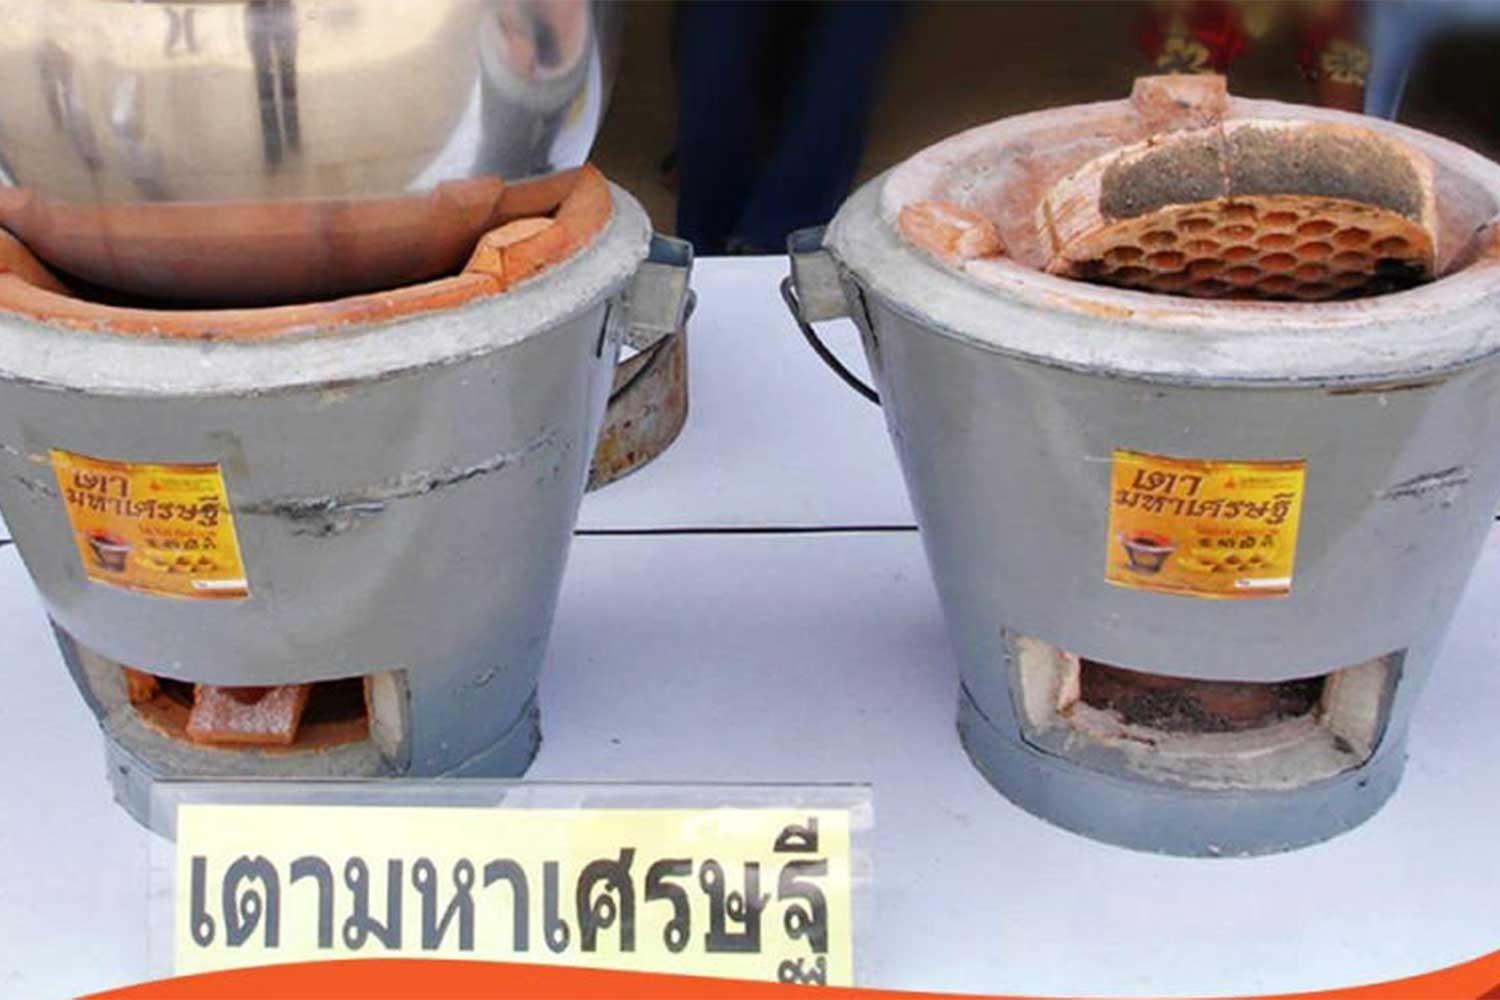 Thailand's Department of Alternative Energy Development and Efficiency promotes the Super Stove